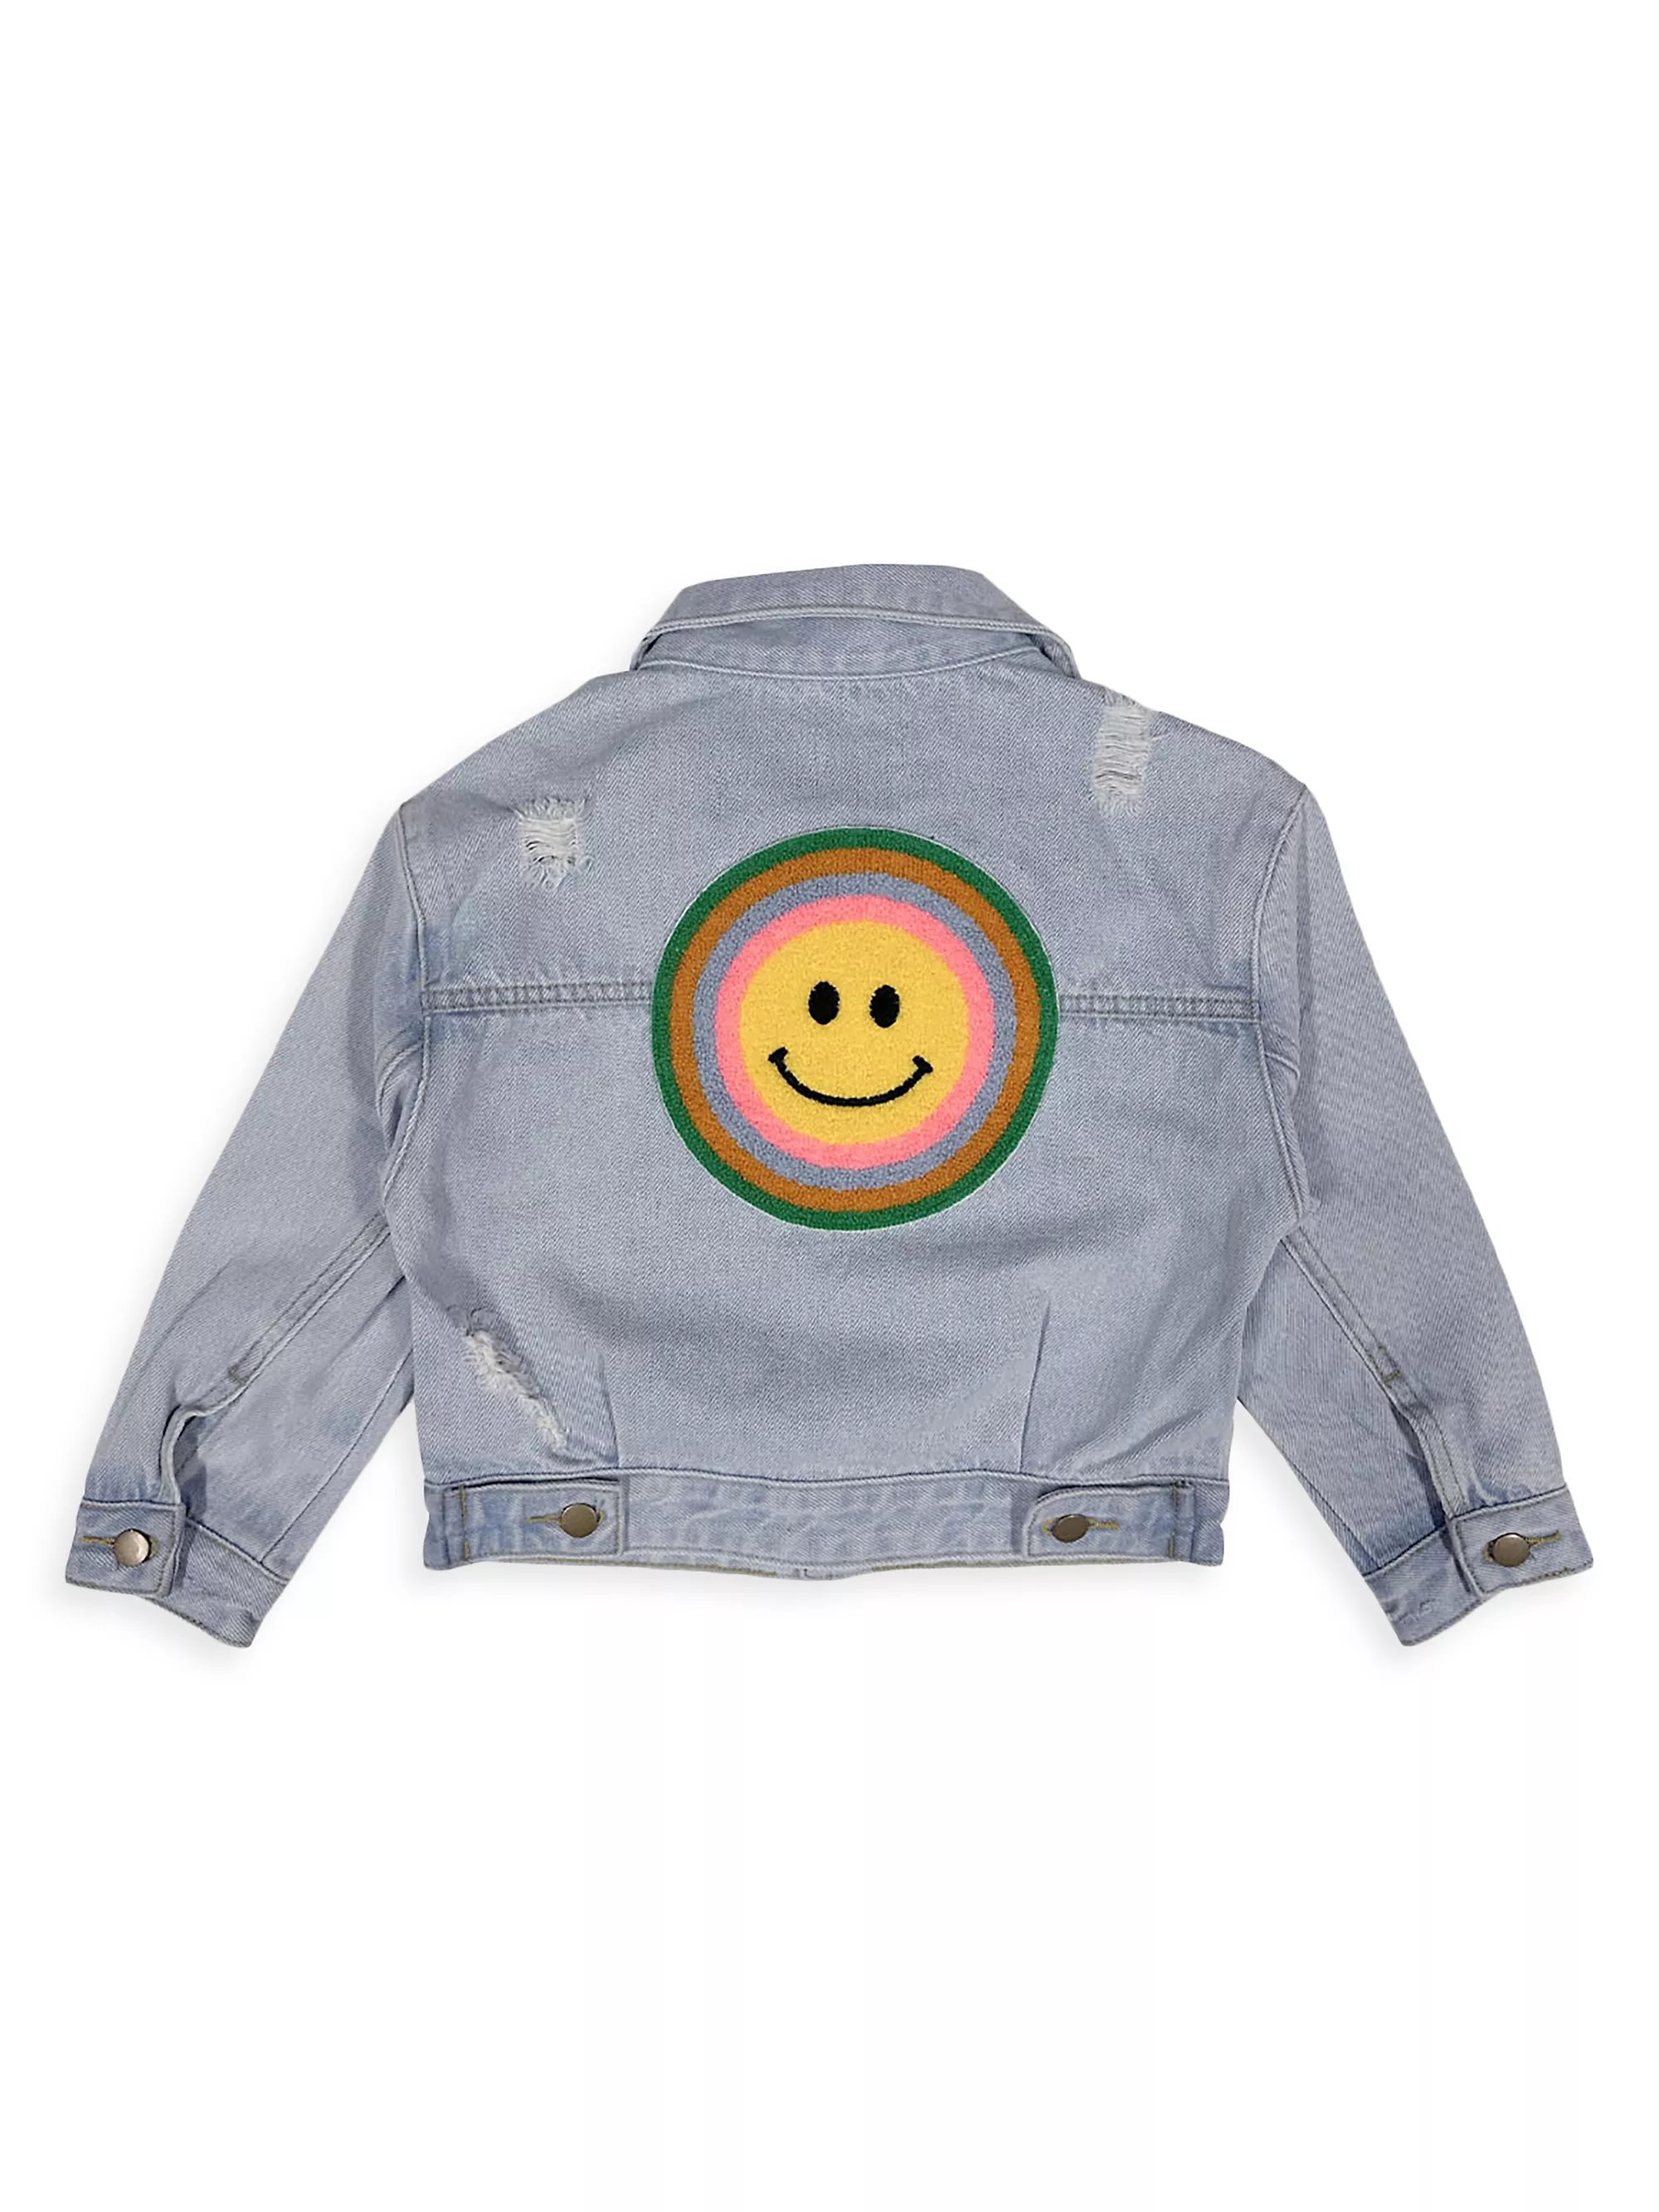 PETITE HAILEY PATCHED DENIM JACKET - SMILEY